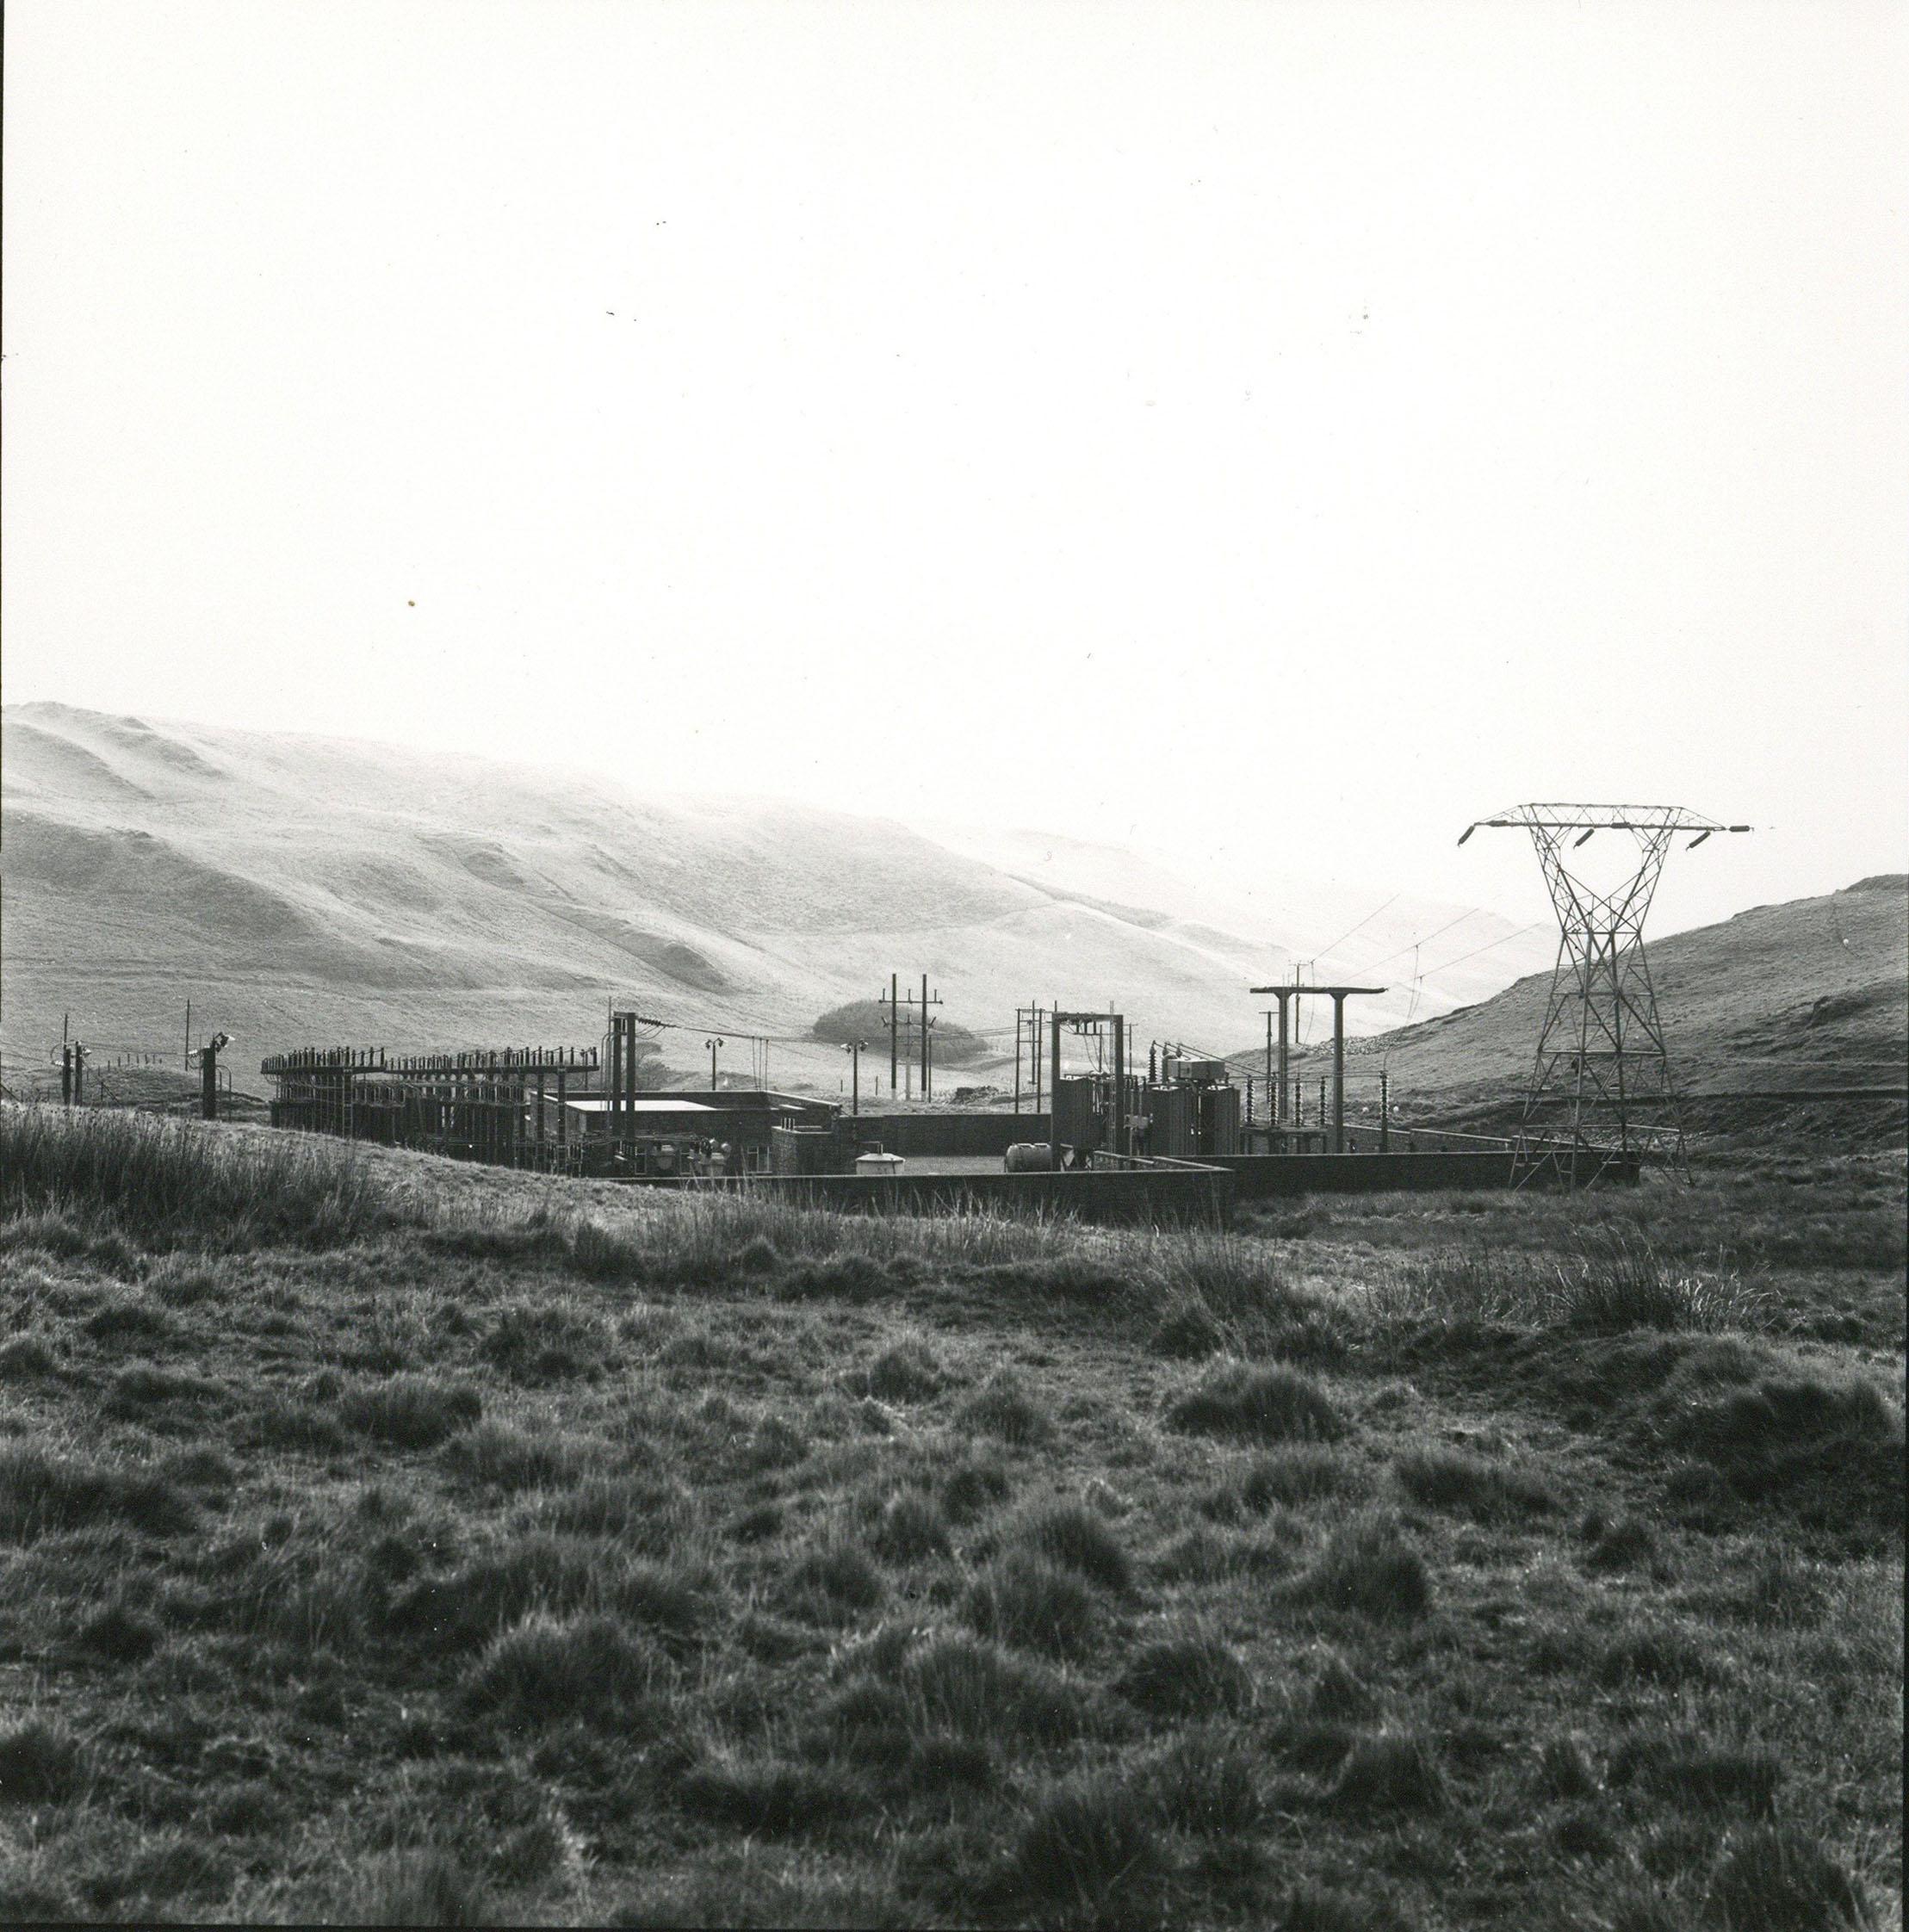 Rosemary Ellis Power Station Gelatin Silver Photograph for book Pipes and Wires 